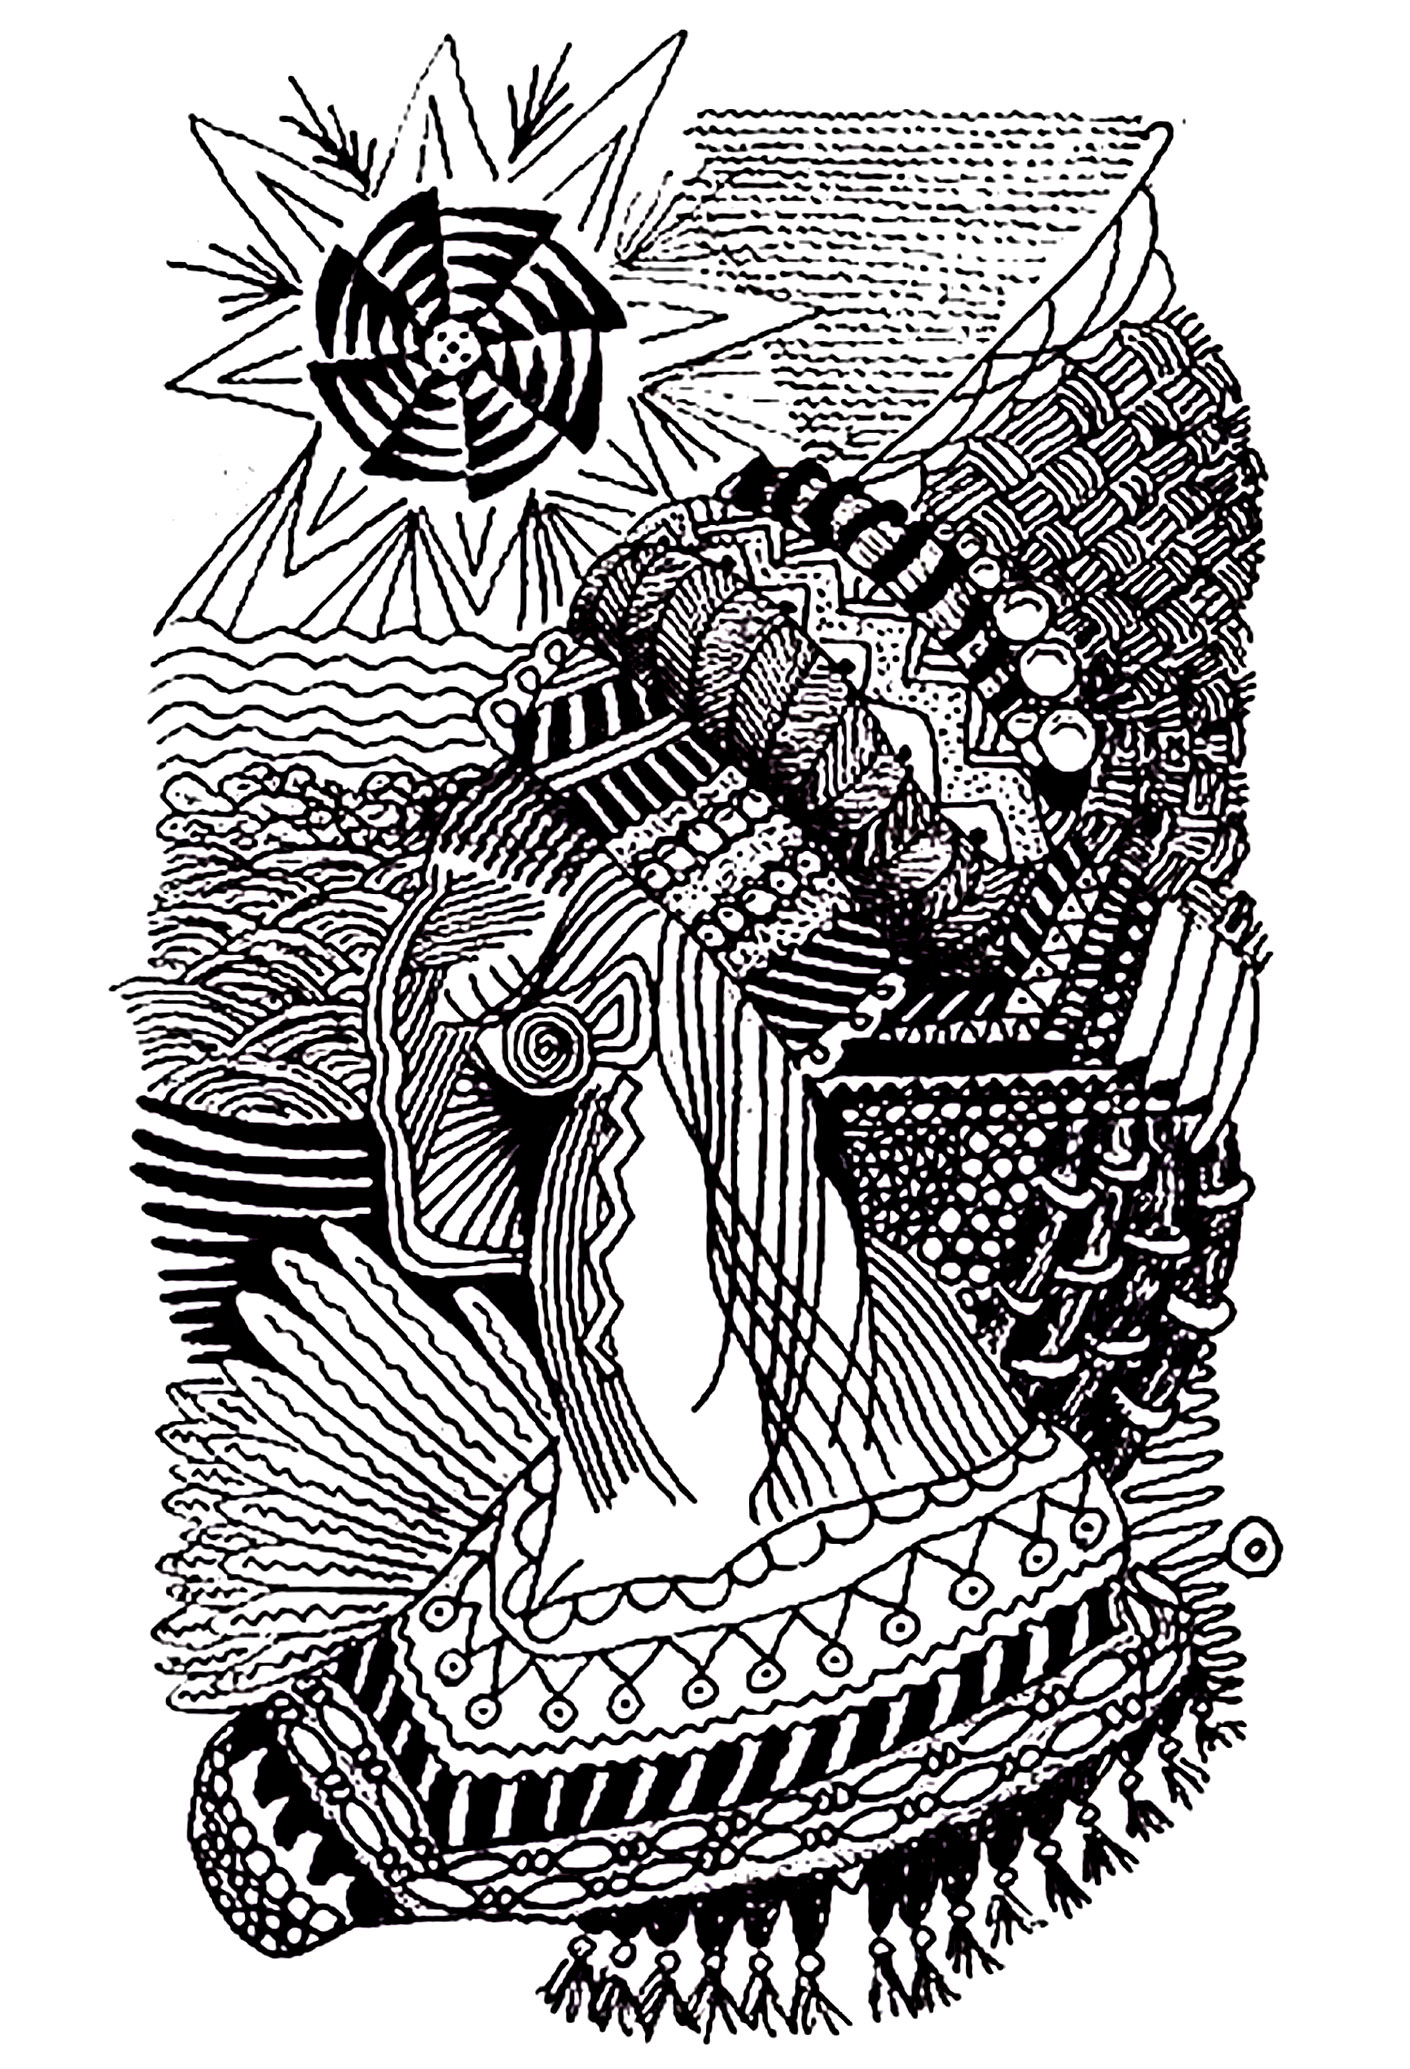 Drawing of an African woman, using zentangle motifs. The lines are drawn with a certain softness, and the Zentangle patterns add a touch of originality and sophistication.This coloring page is a great way to escape and reconnect with your creative side.